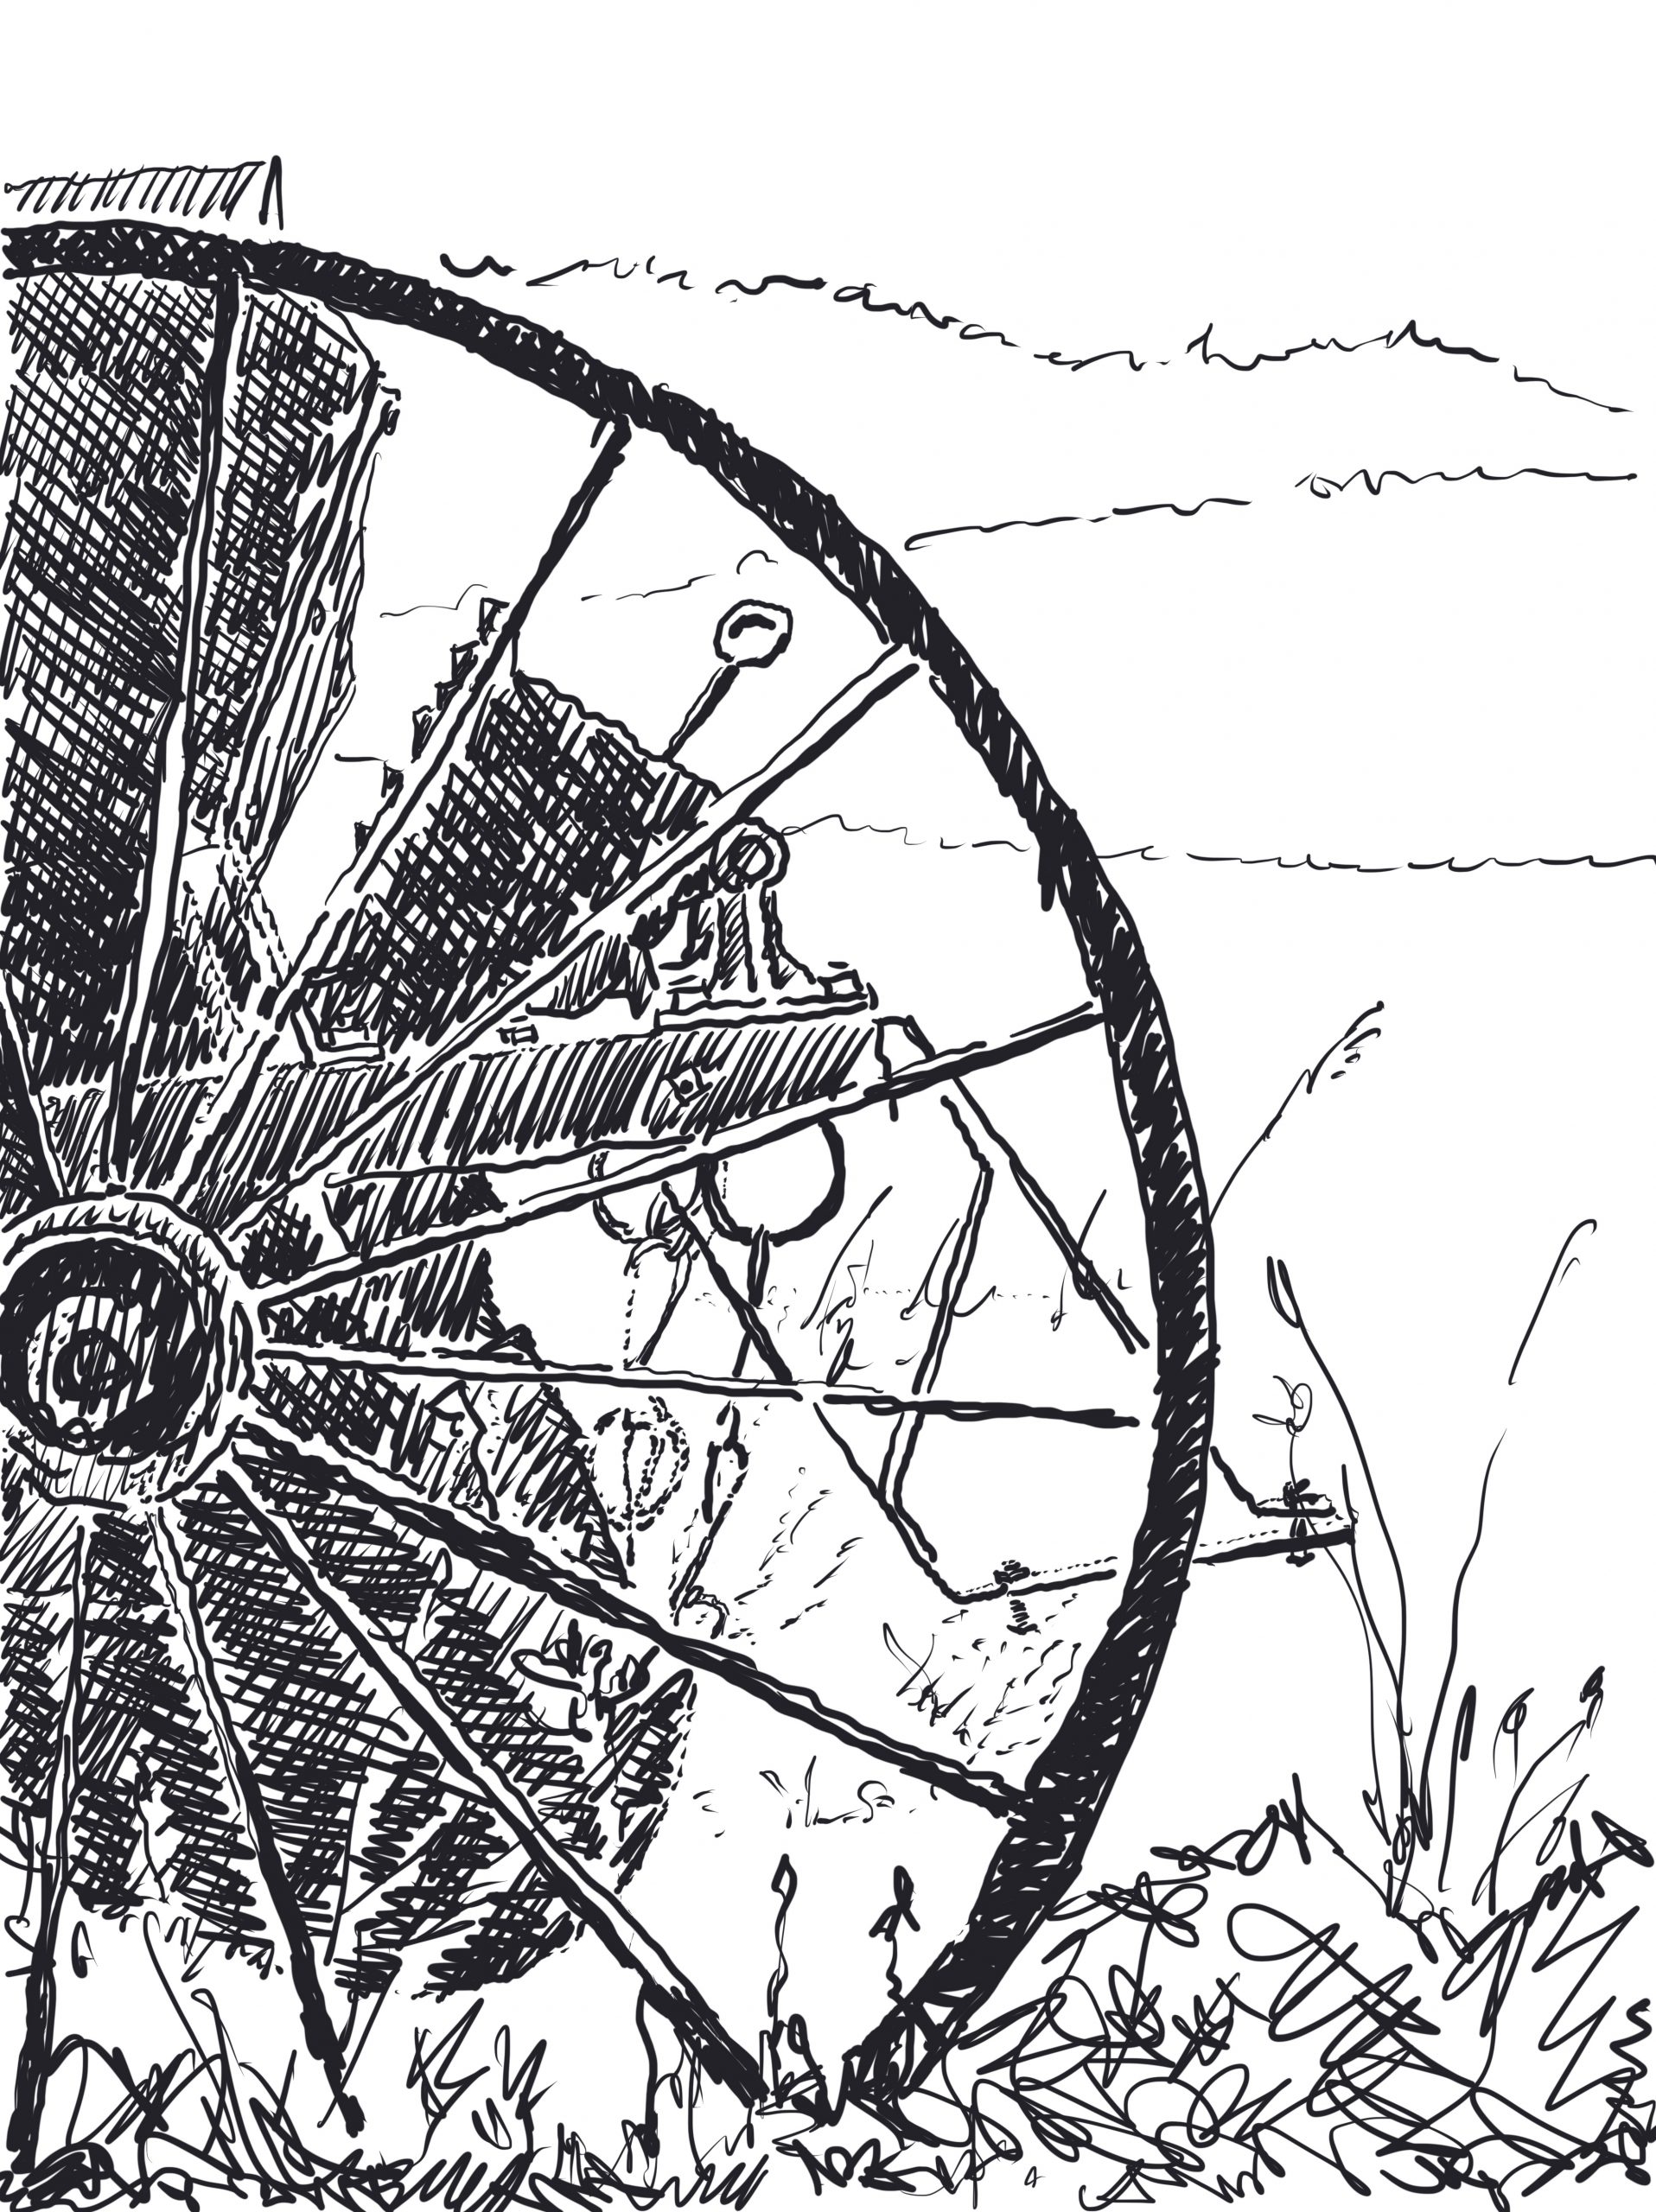 Black and white hand sketch of abandoned farm equipment.